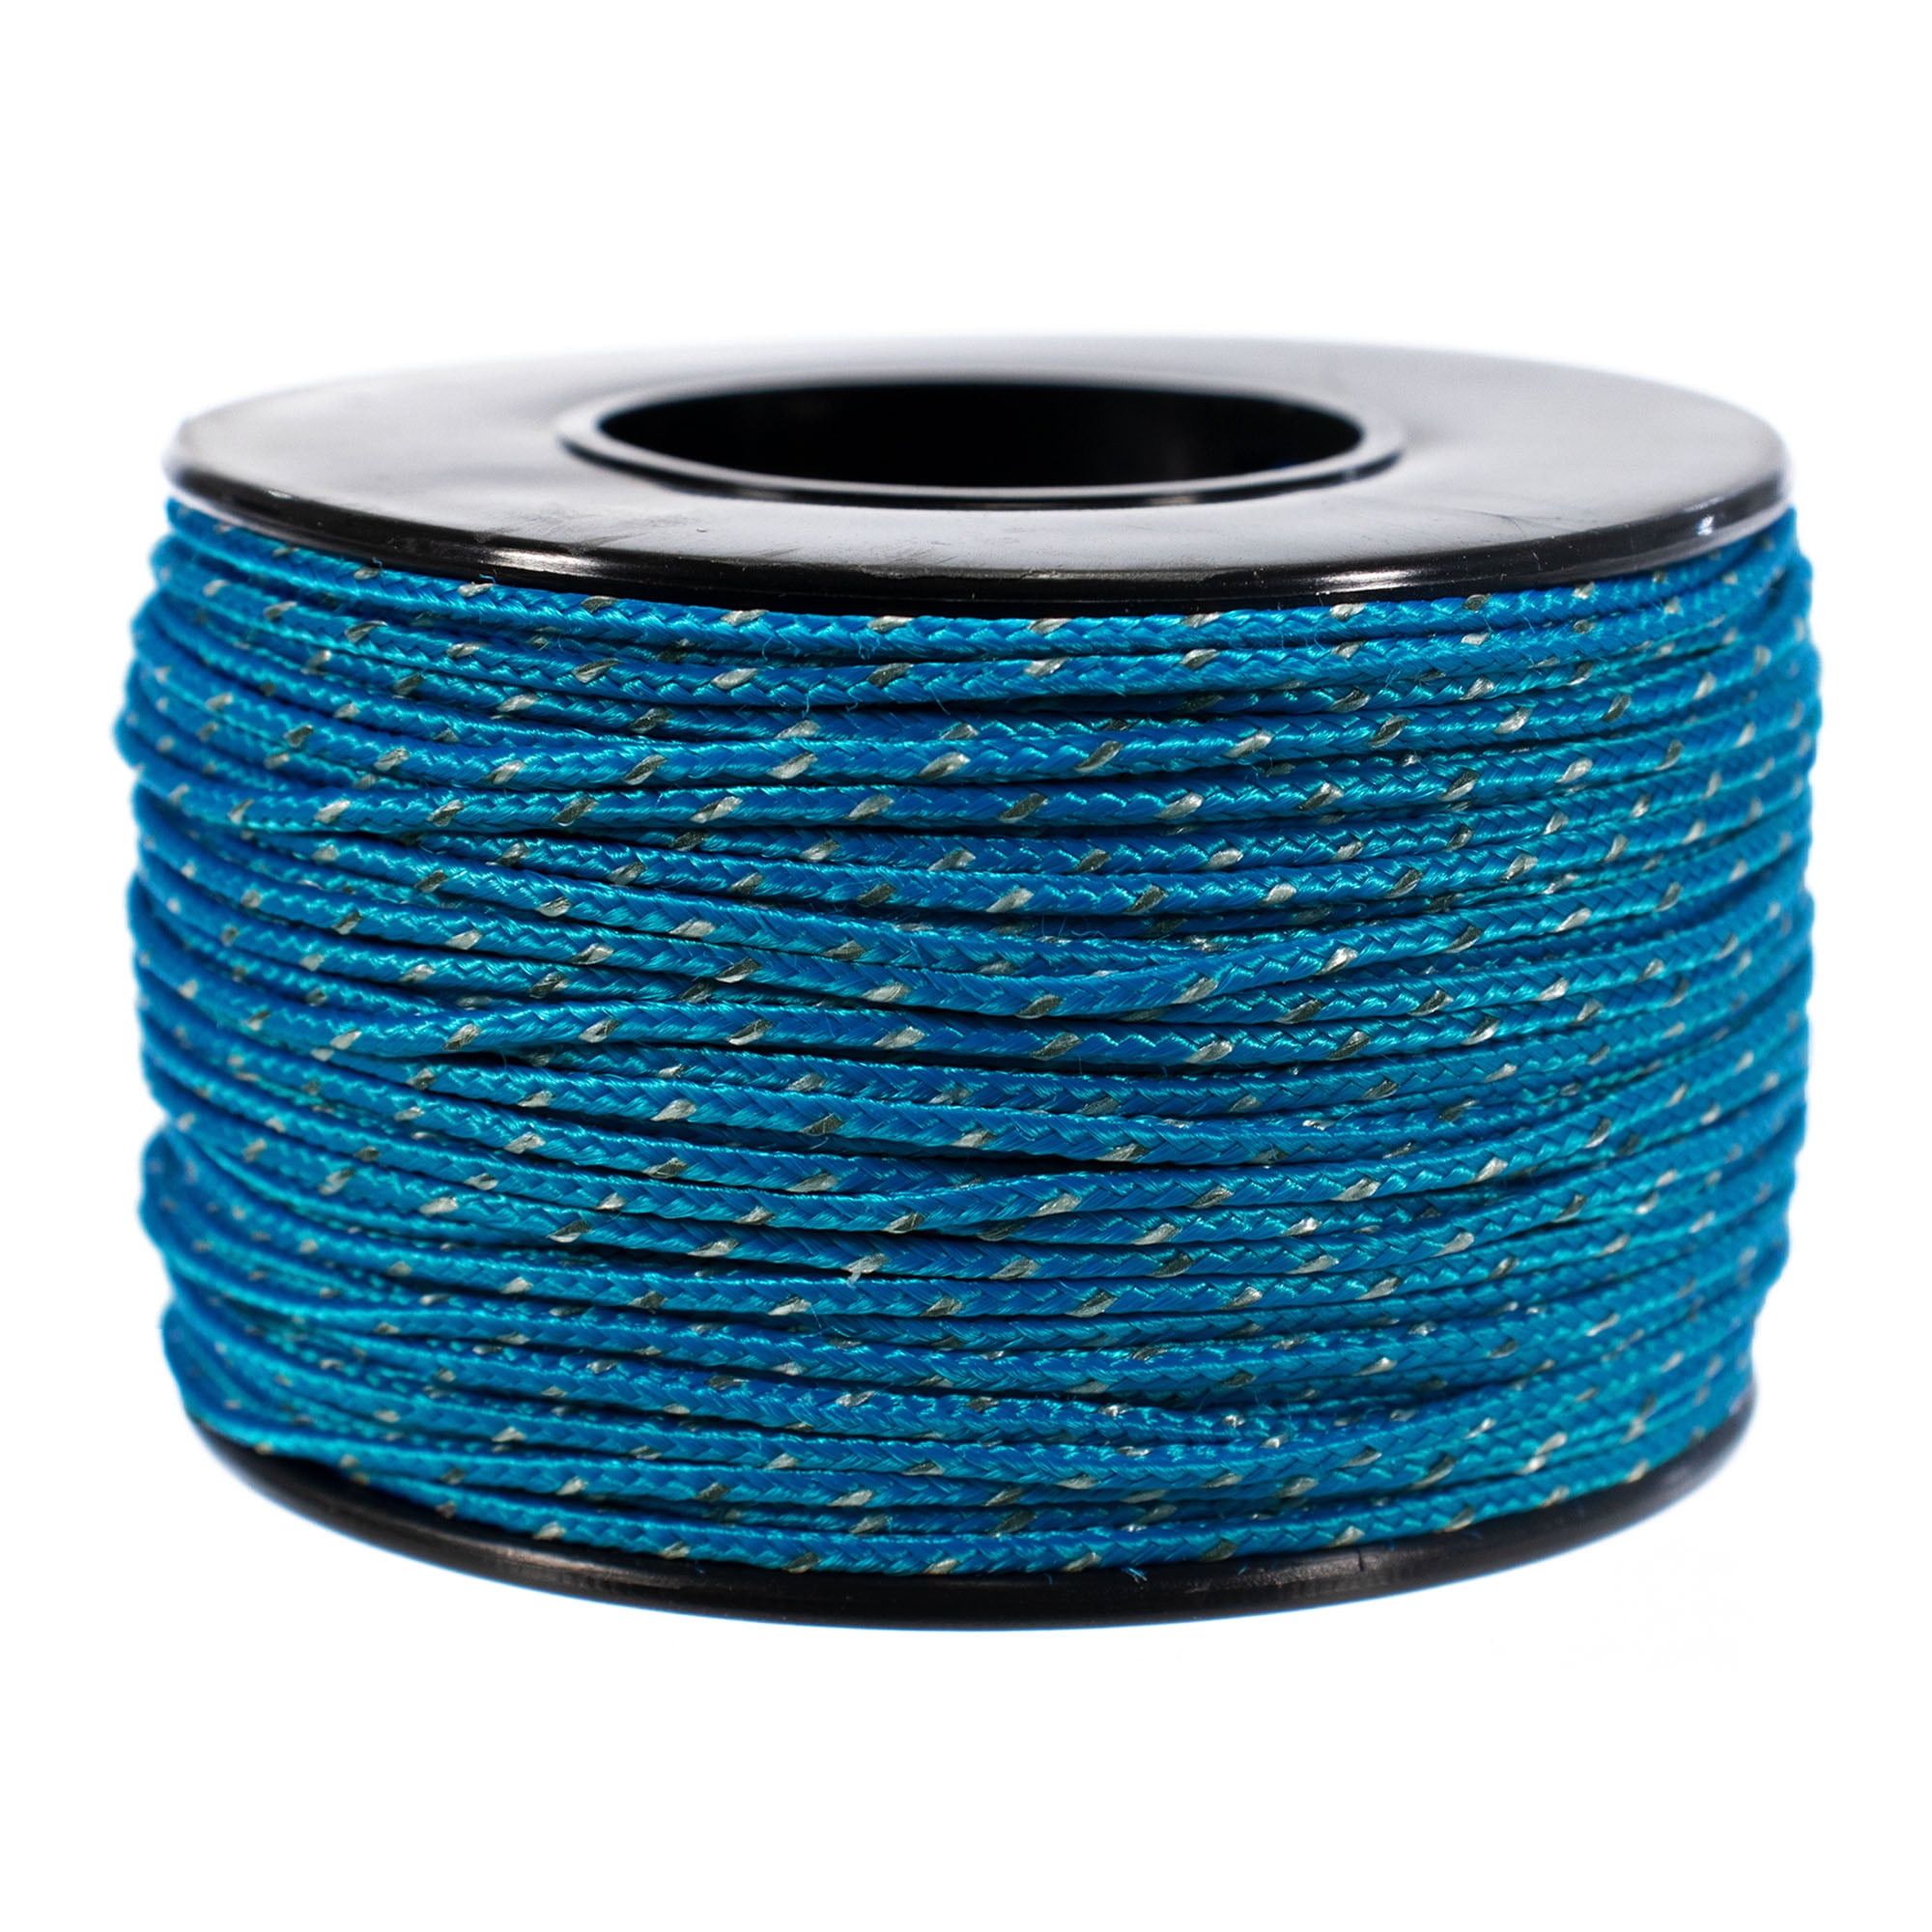  PARACORD PLANET Micro Cord 1.18mm Diameter 125 Feet Spool of  Braided Cord - Available in a Variety of Colors Made in The USA : Sports &  Outdoors